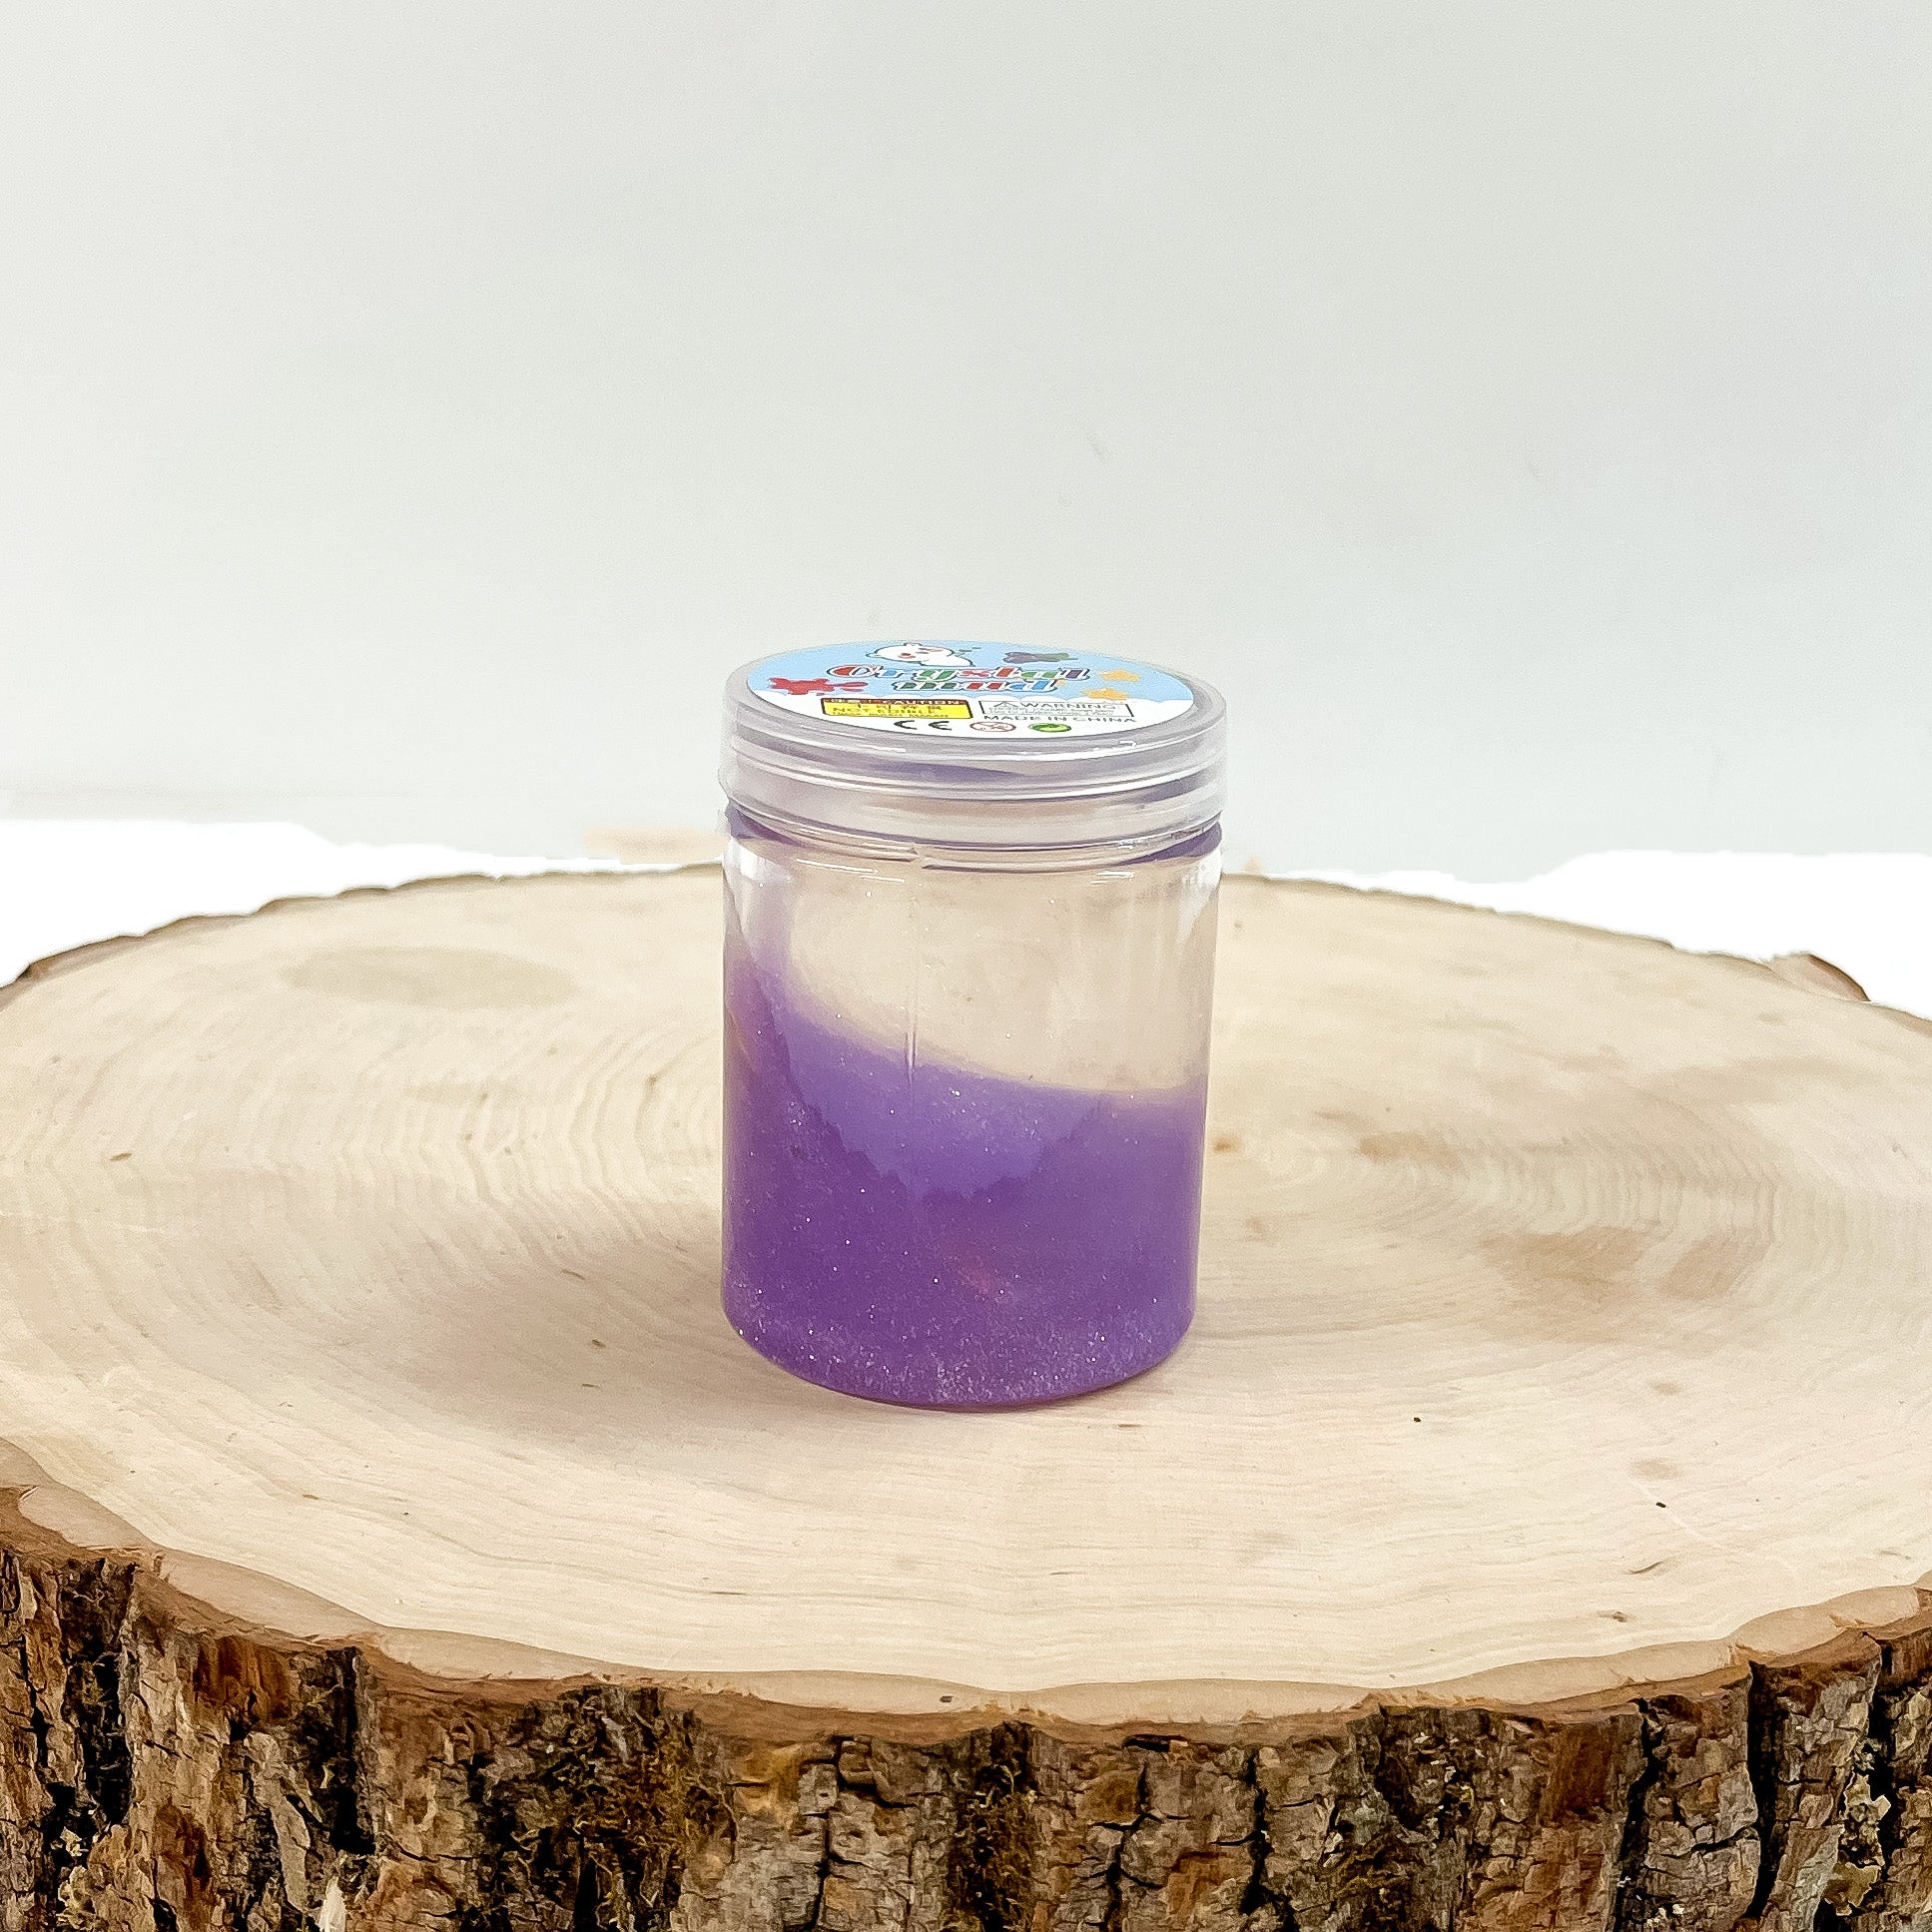 This is a clear slime with purple glitter, this container is taken on a slab of  wood and on a white background.